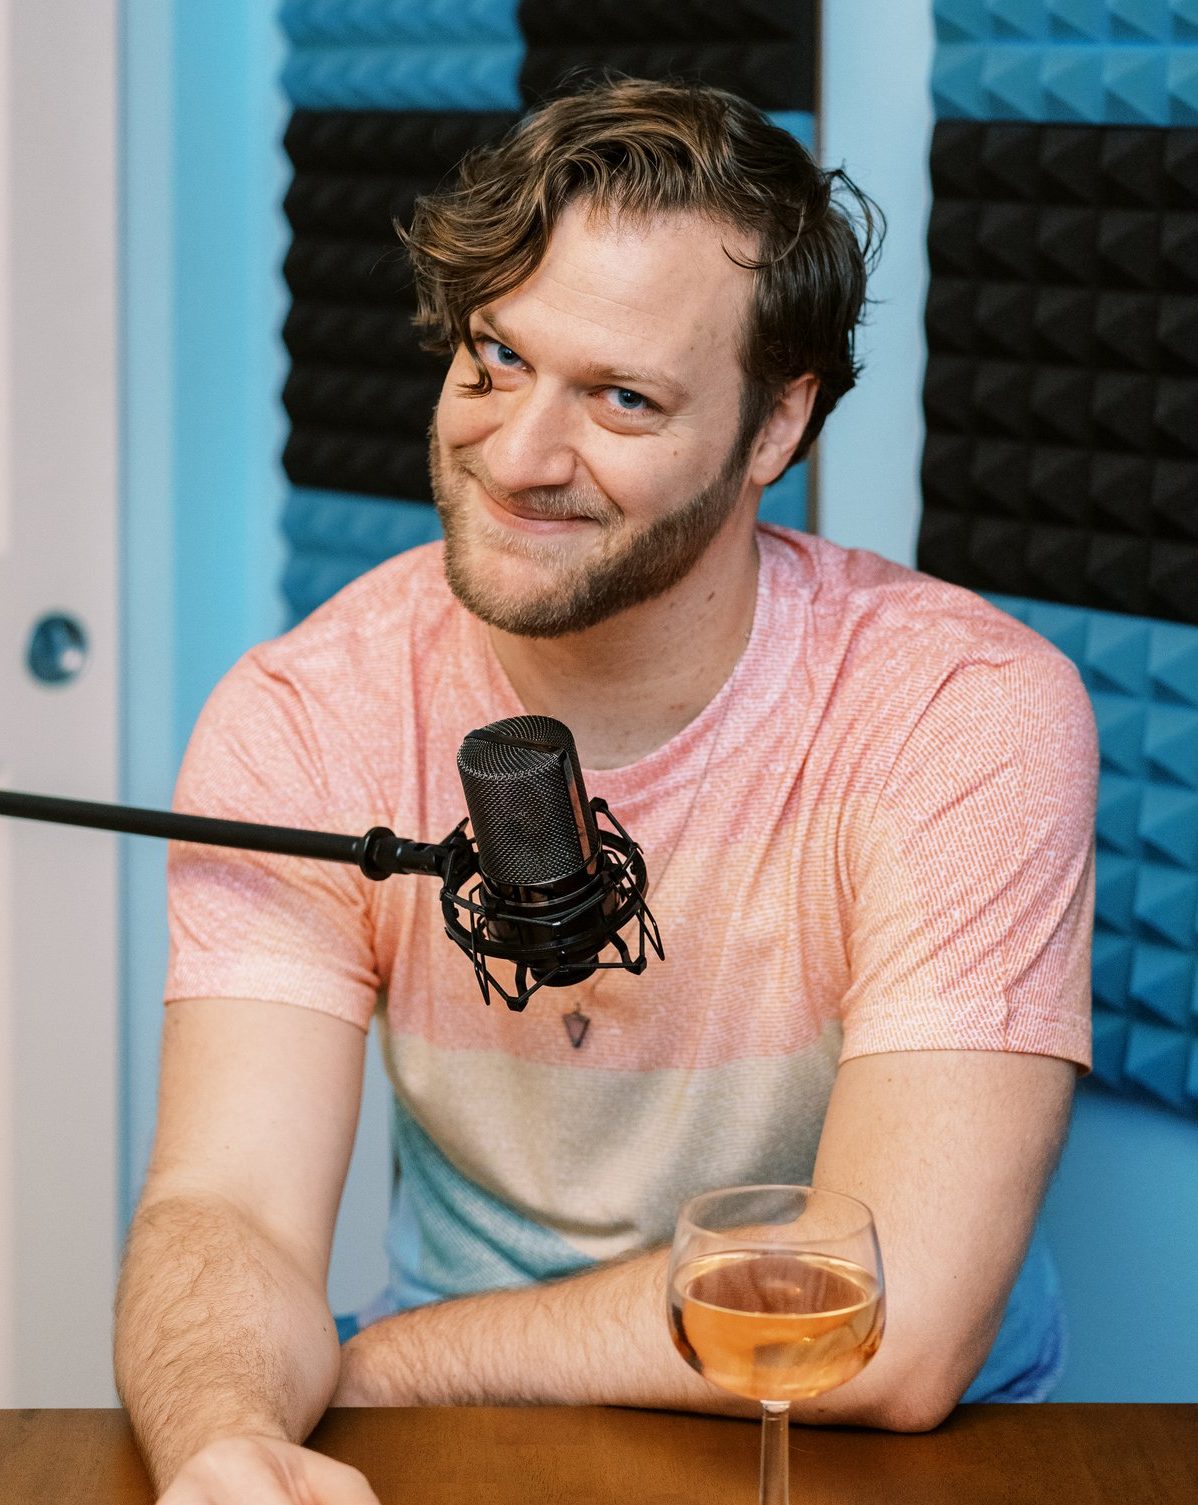 Kyle is sitting at a table smirking at the camera. He is wearing a rainbow shirt with a mic in front of him and a glass of rose on the table.